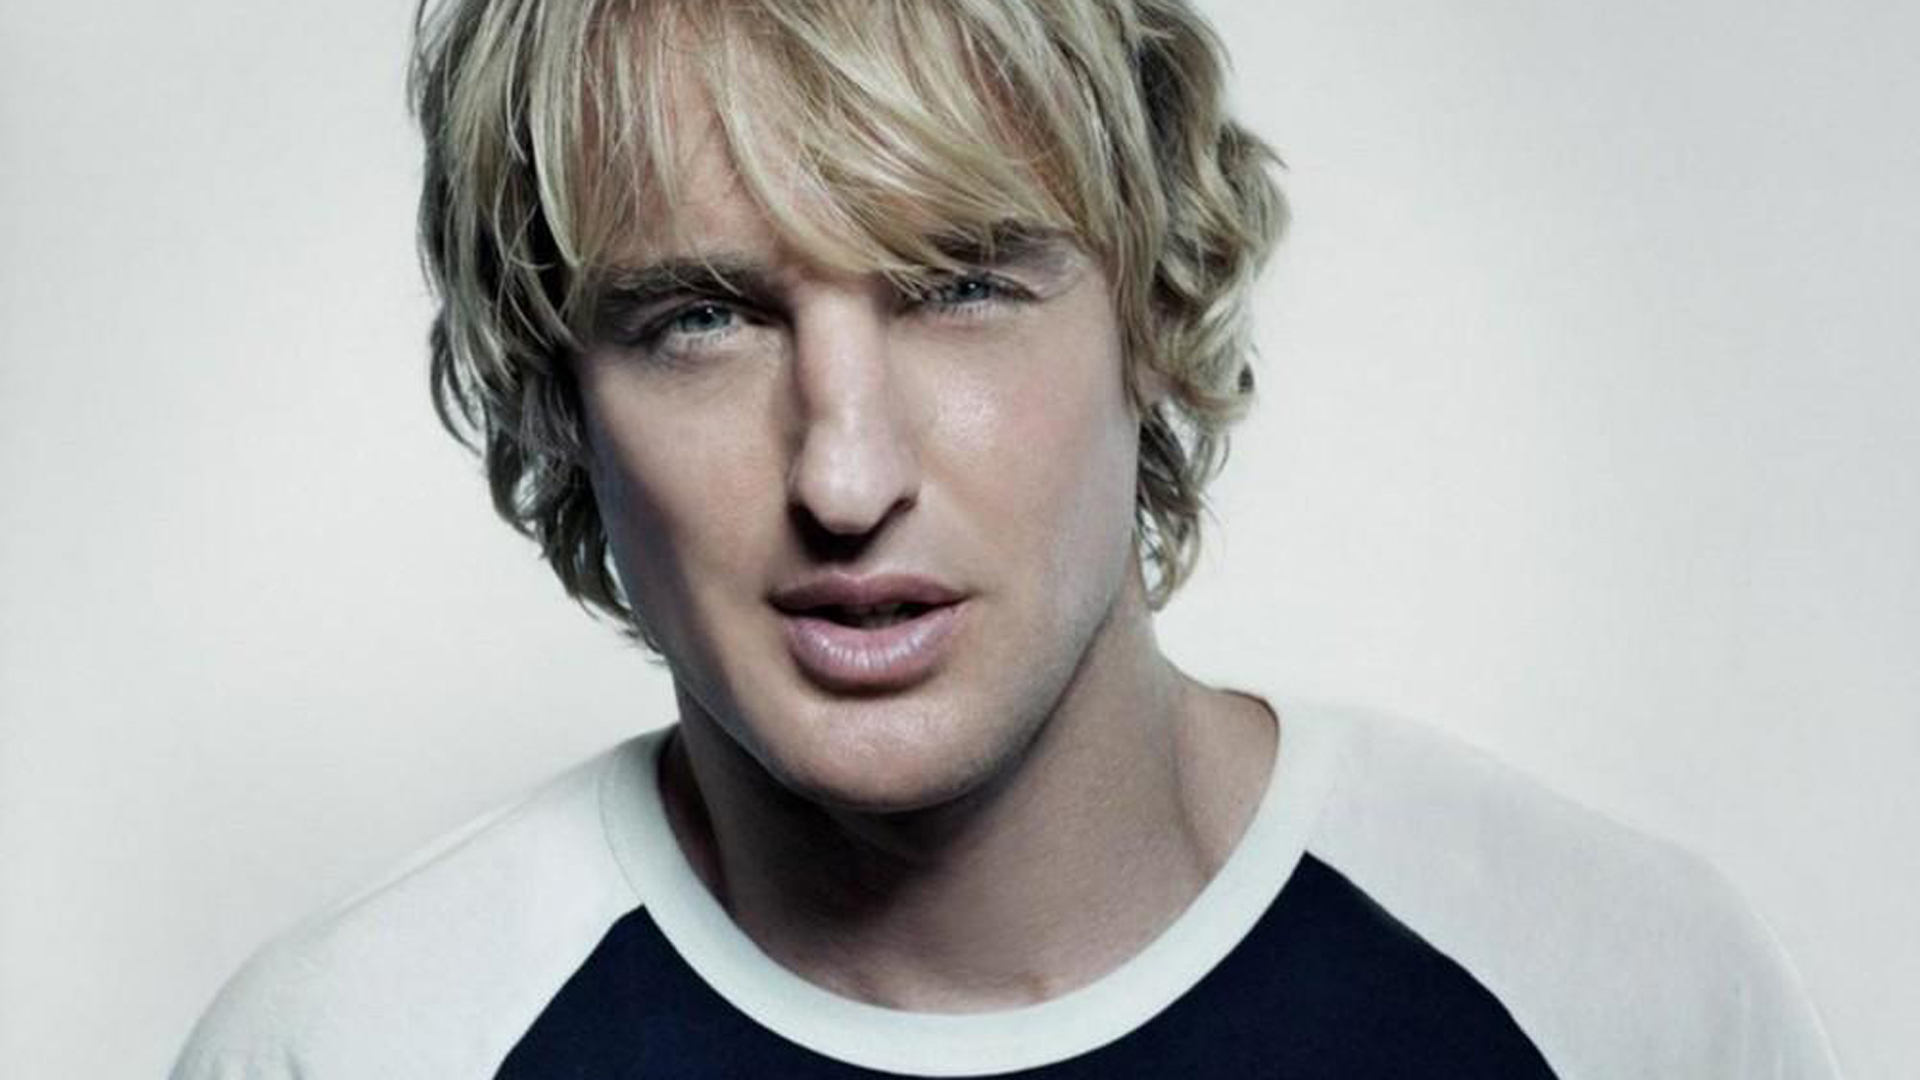 Owen Wilson Wallpapers Images Photos Pictures Backgrounds.